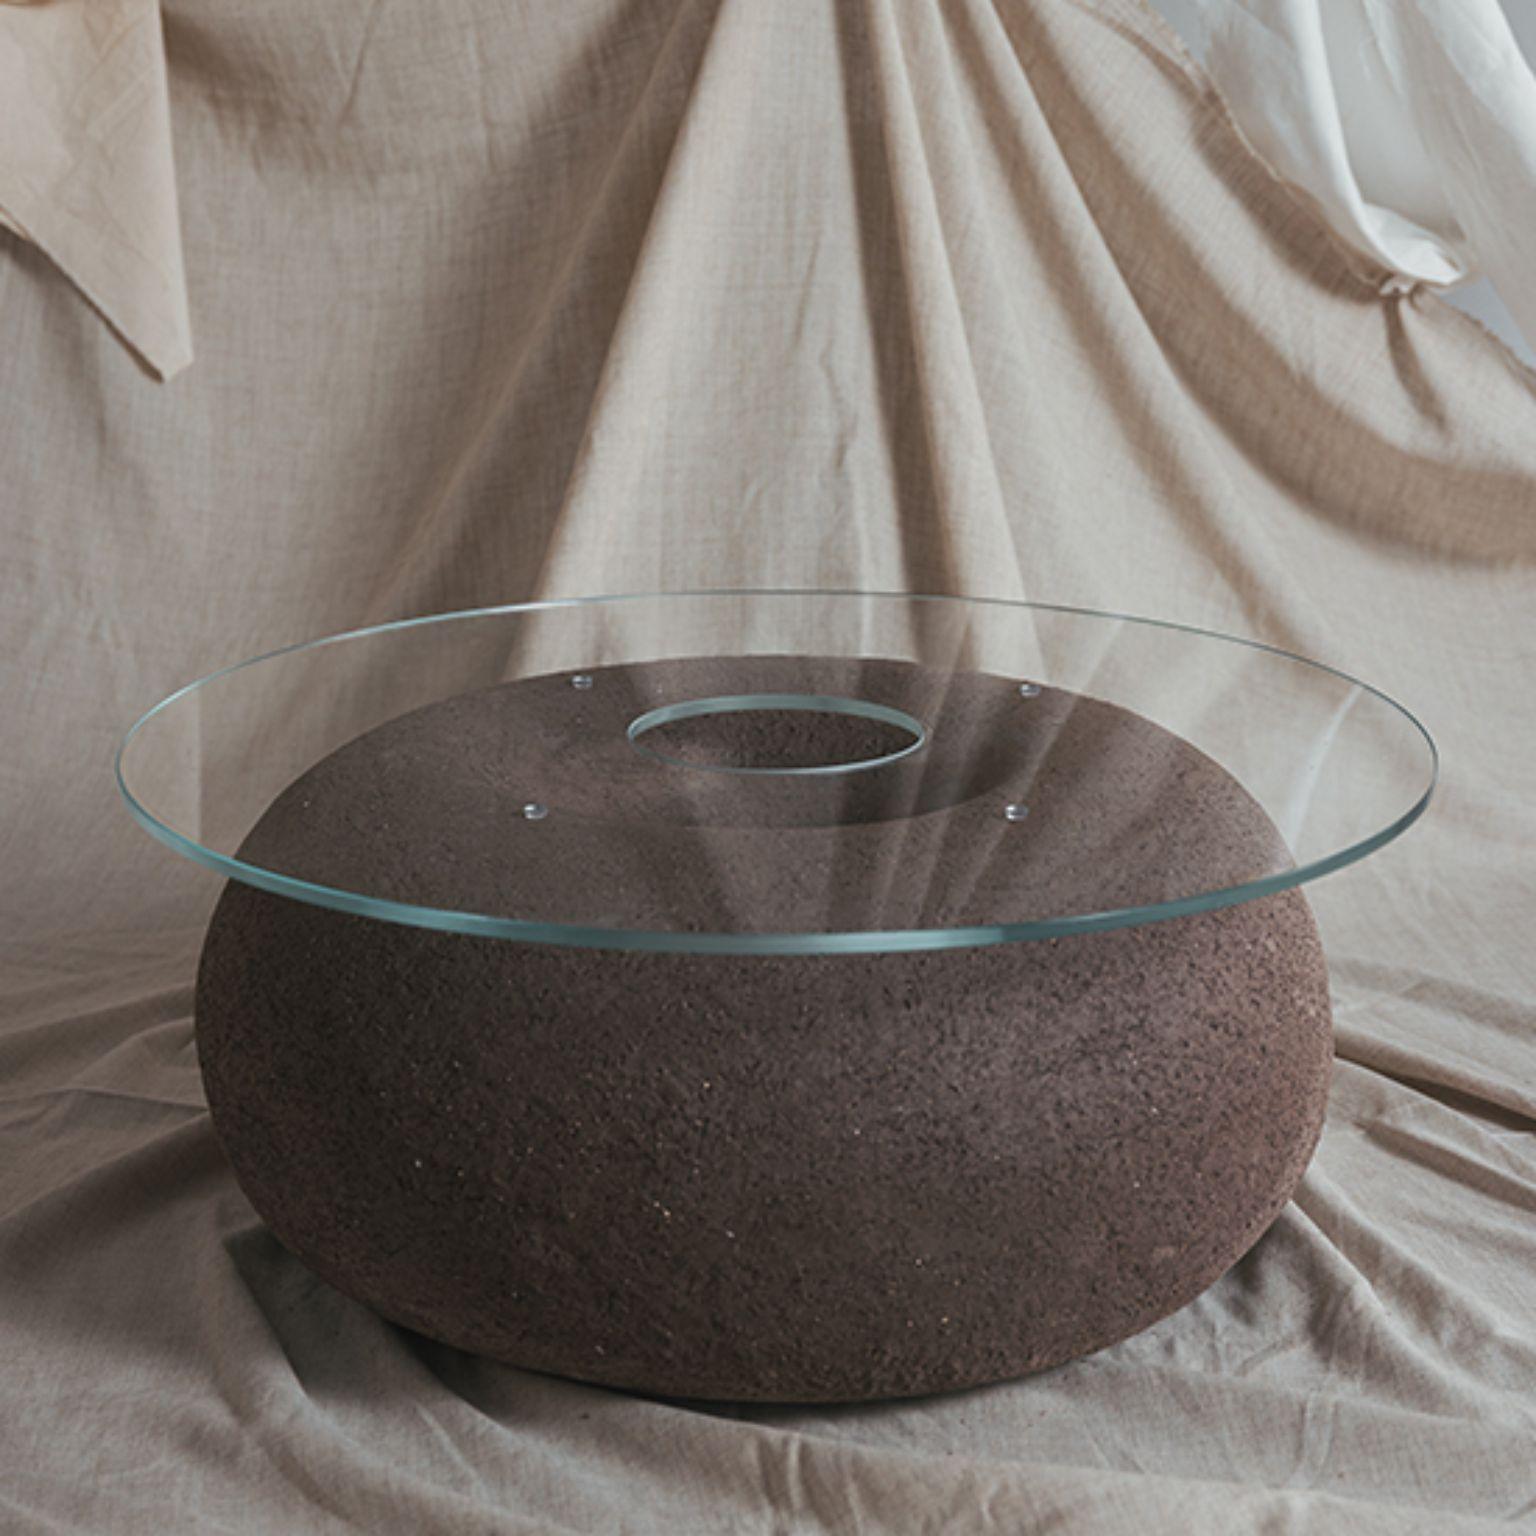 Hestia Coffee Table by Cuit Studio
One of a Kind.
Dimensions: Ø 80 x H 35 cm.
Materials: Textured black stoneware and tempered glass.

Sculptural coffee table. Black stoneware volcanic finish with 10mm extraclear tempered glass. Handmade in